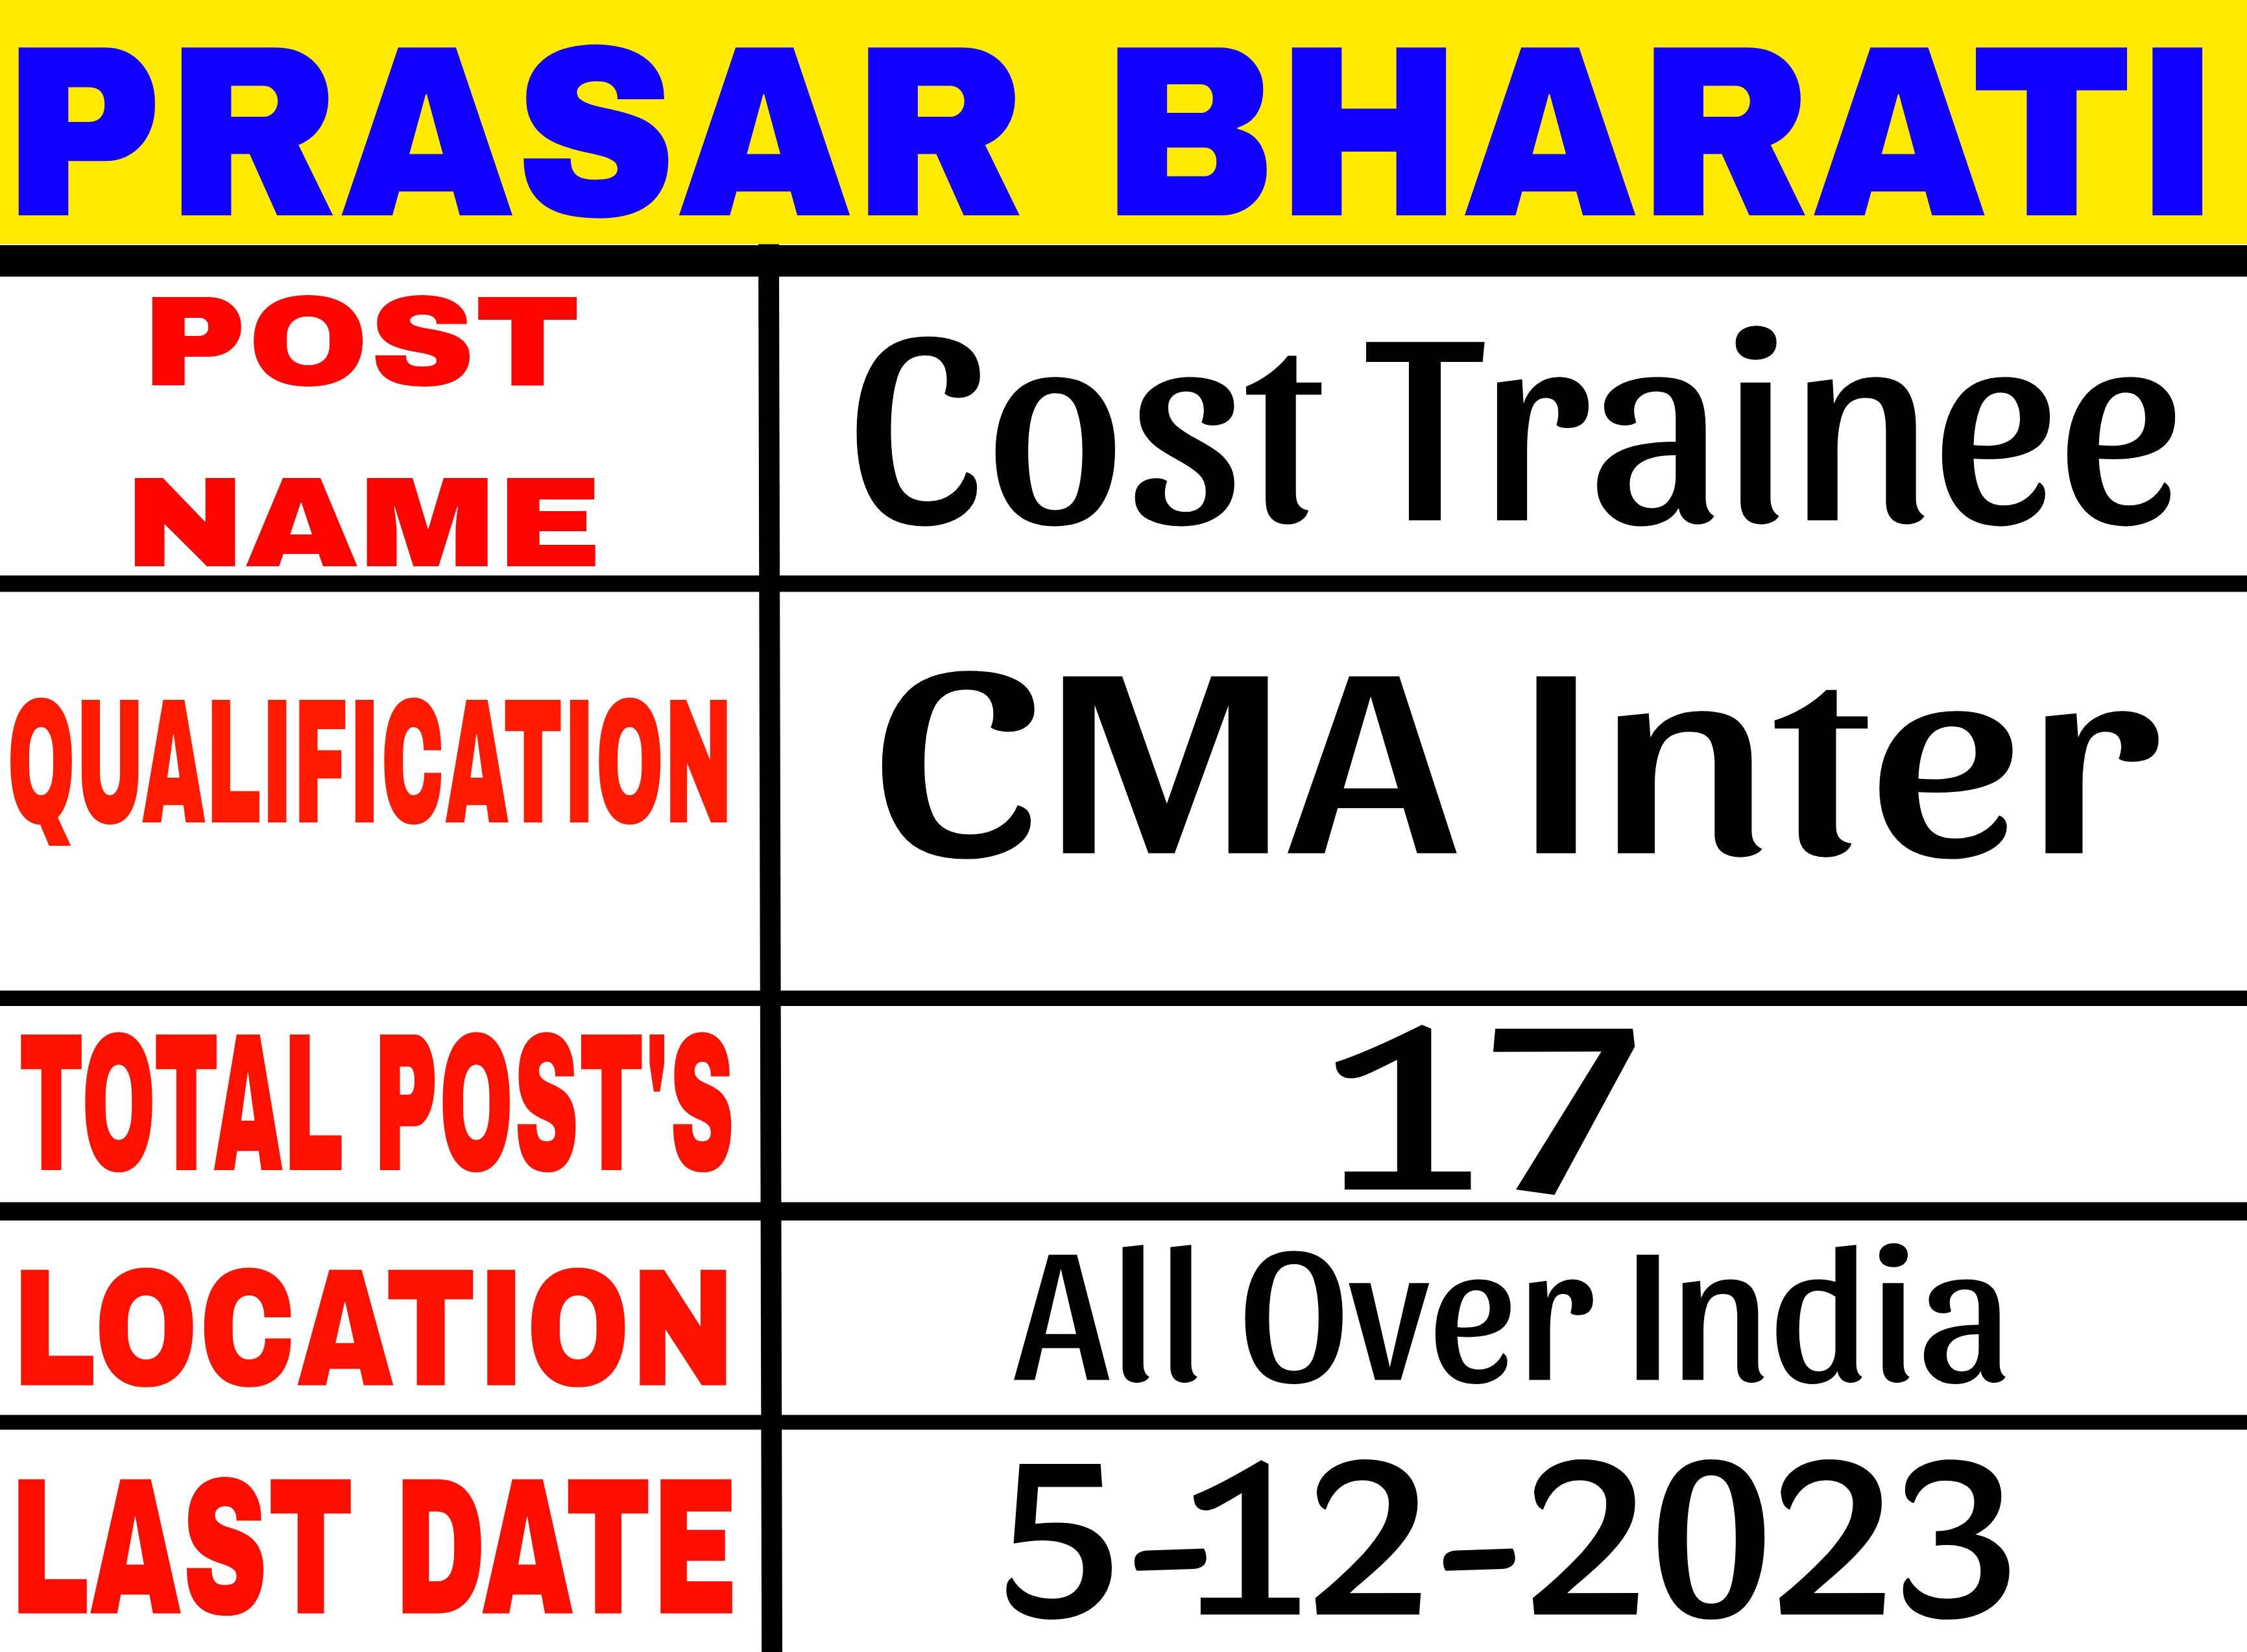 Prasar Bharati Cost Trainee Notification 2023 for 17 Post